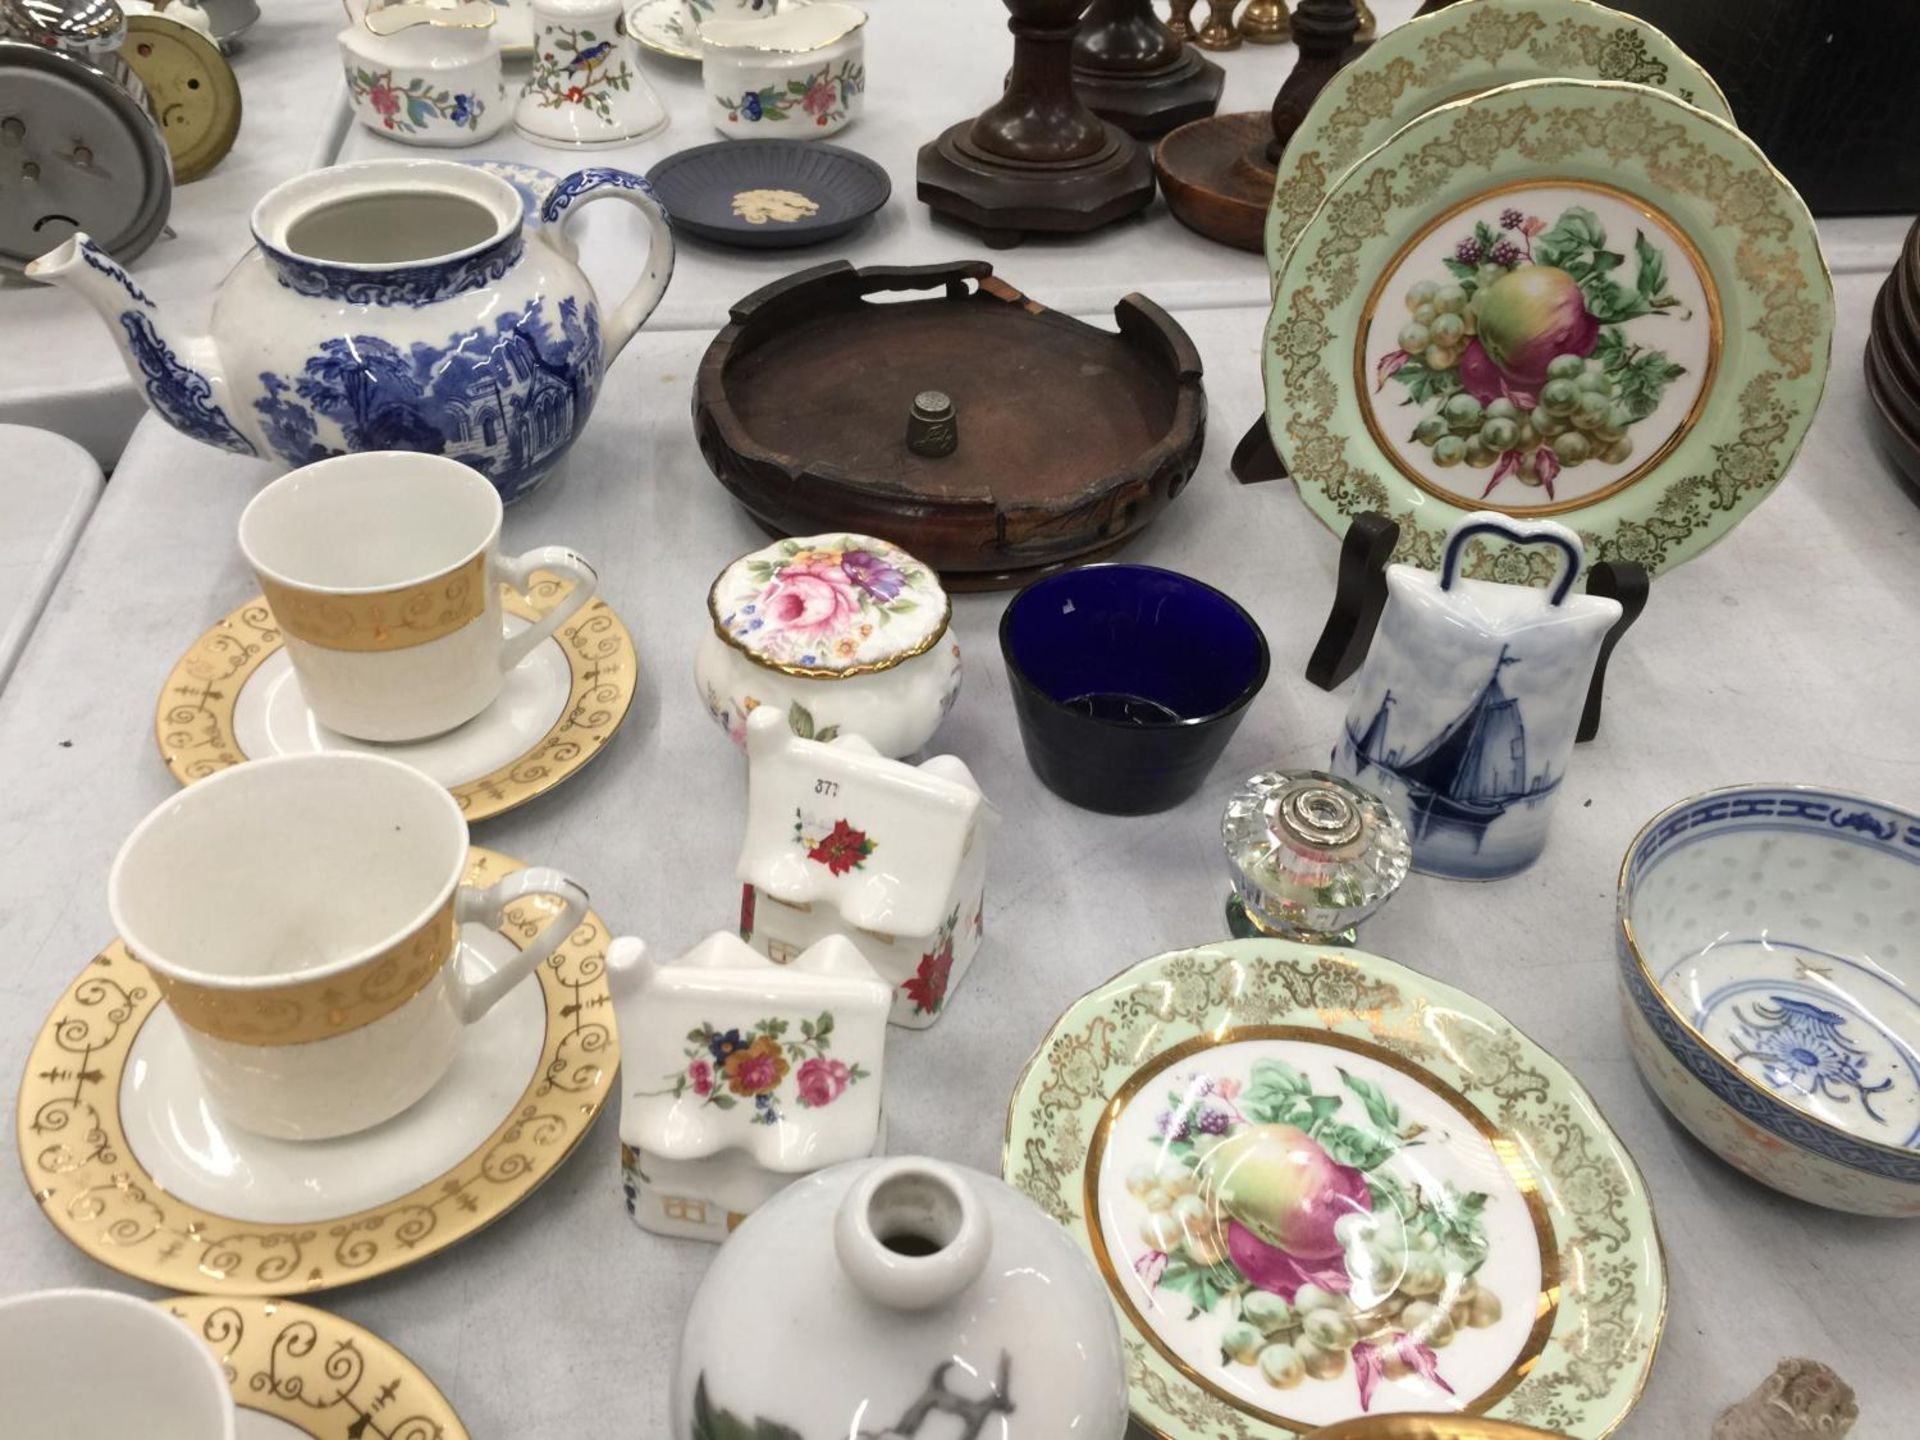 A COLLECTION OF CERAMICS AND CHINA TO INCLUDE CUPS AND SAUCERS, PLATES, COTTAGES, THIMBLES, ETC - Image 6 of 6